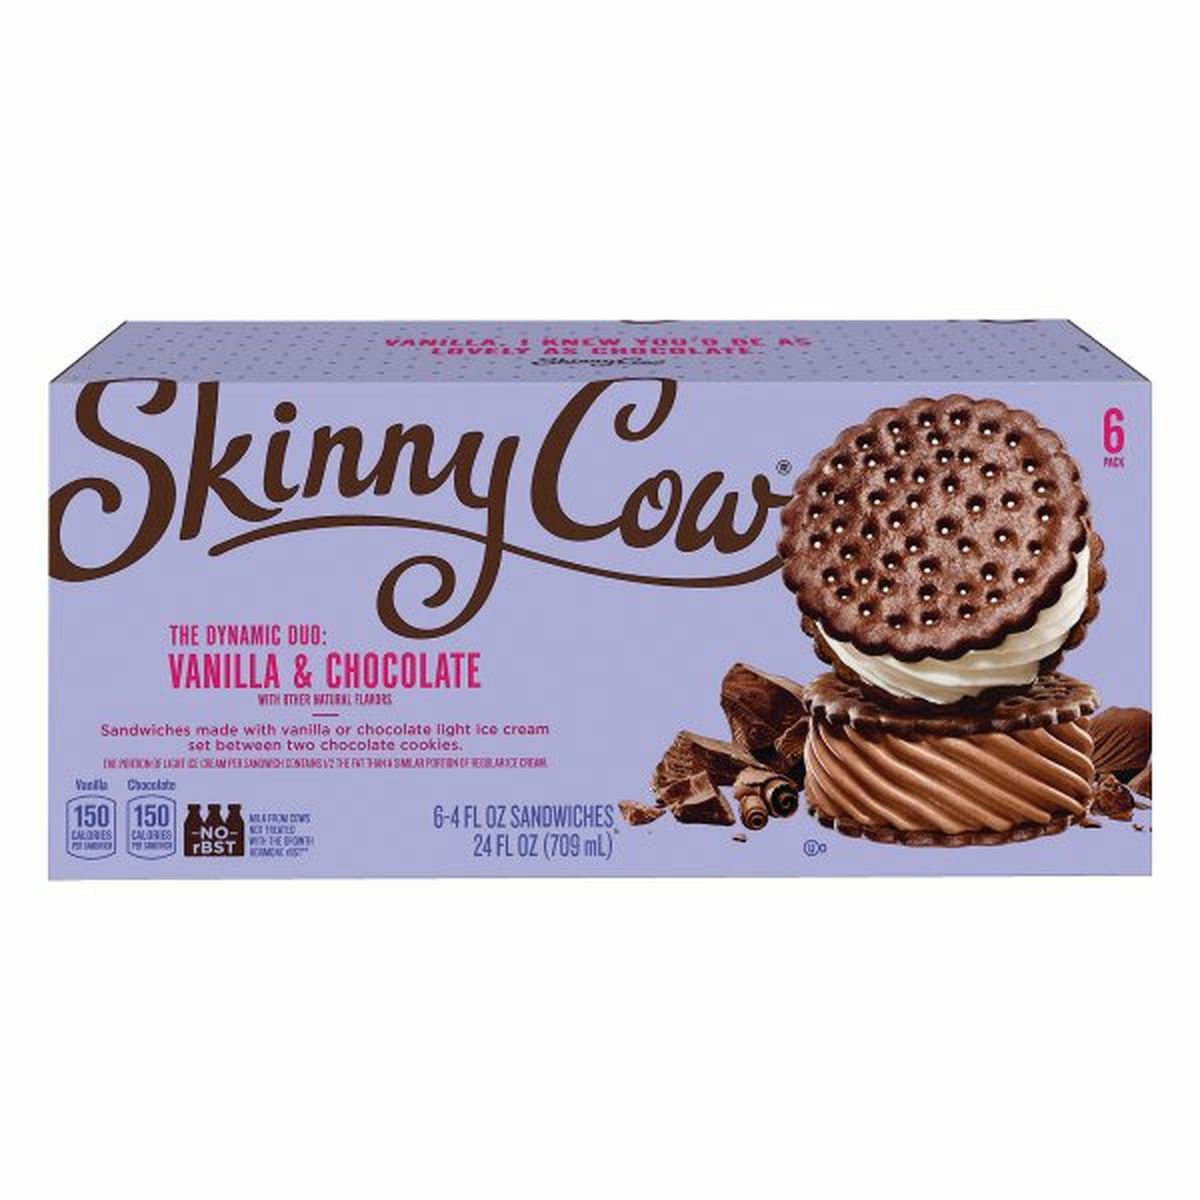 Calories in Skinny Cow Sandwich, Vanilla & Chocolate, 6 Pack